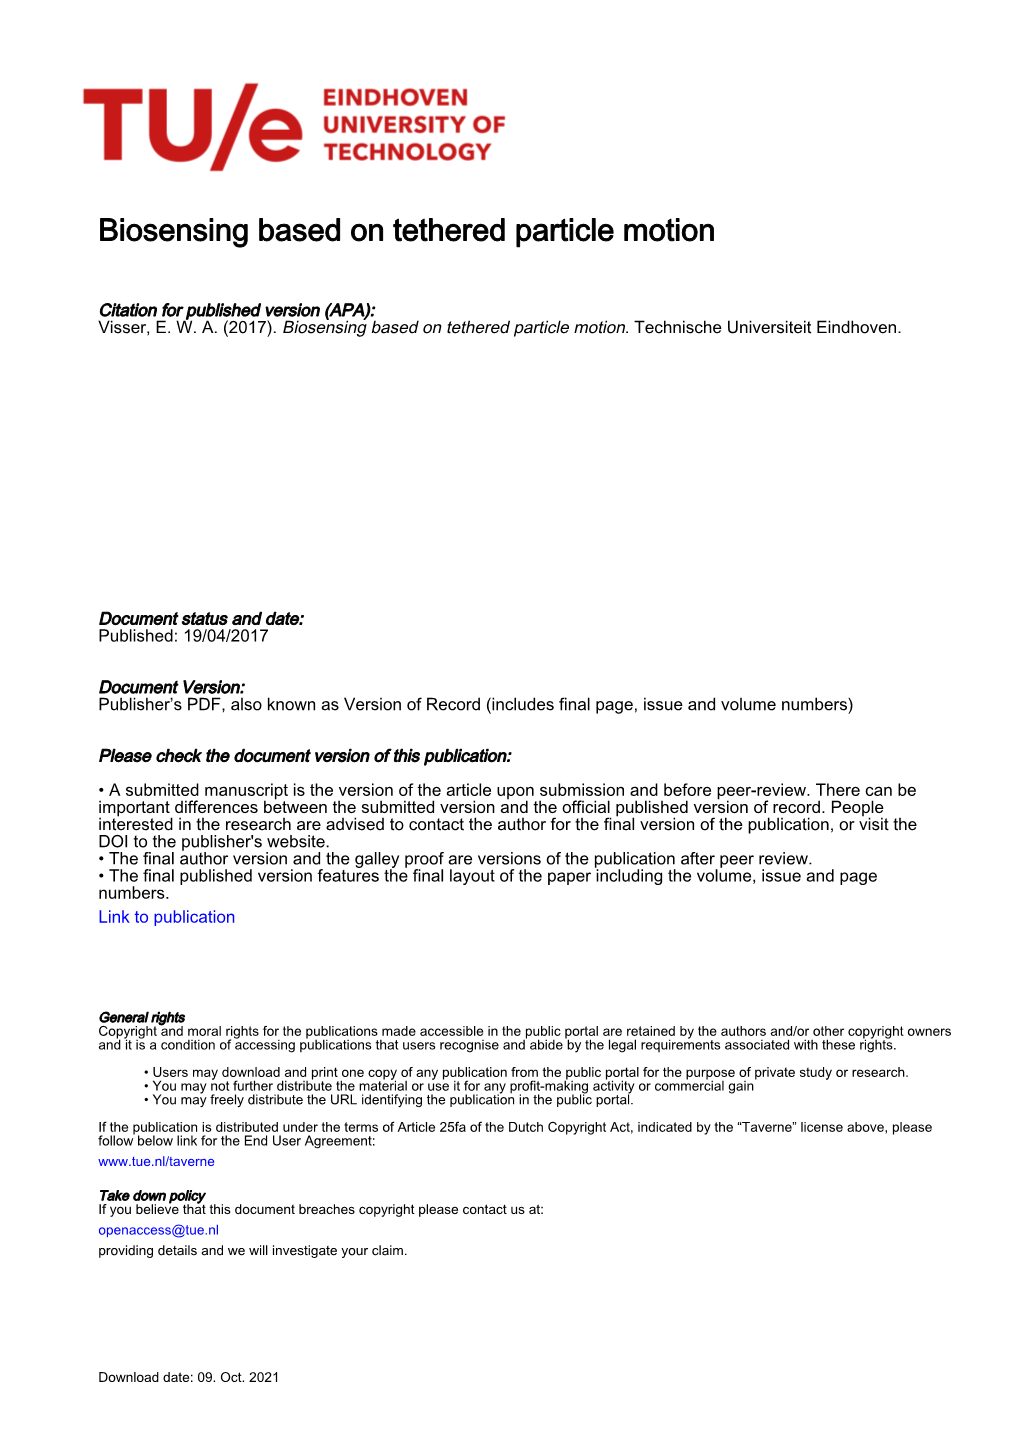 Biosensing Based on Tethered Particle Motion